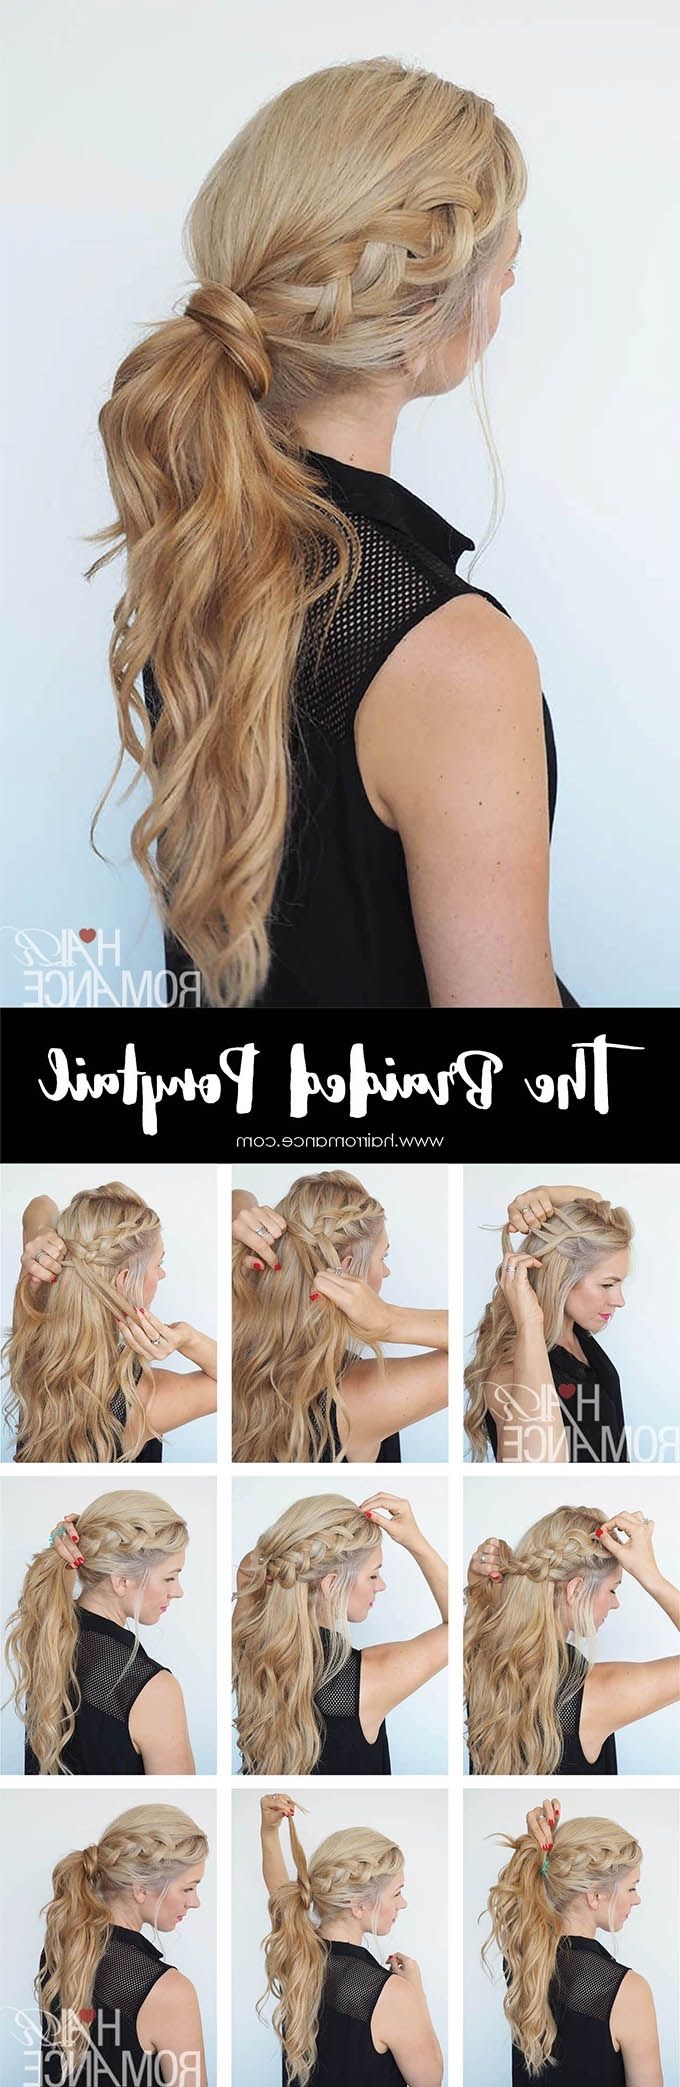 Most Recent Romantic Ponytail Hairstyles For Get Out Of A Hair Rut – Braided Ponytail Hairstyle Tutorial – Hair (View 18 of 20)